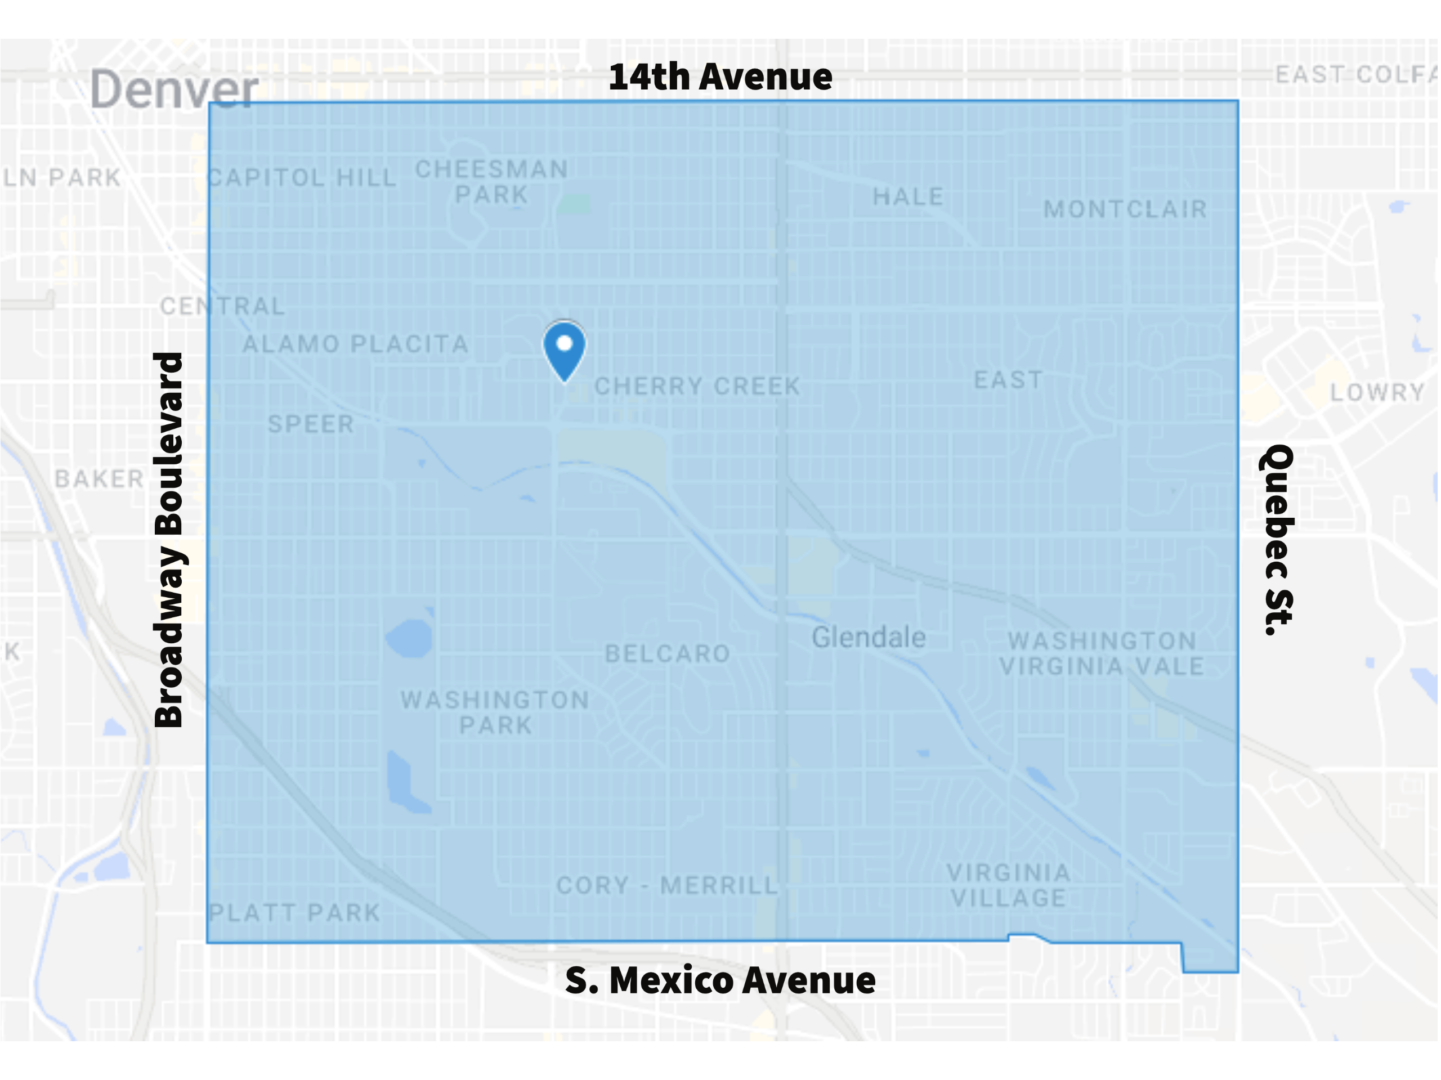 A map of the city of 1 4 th avenue.